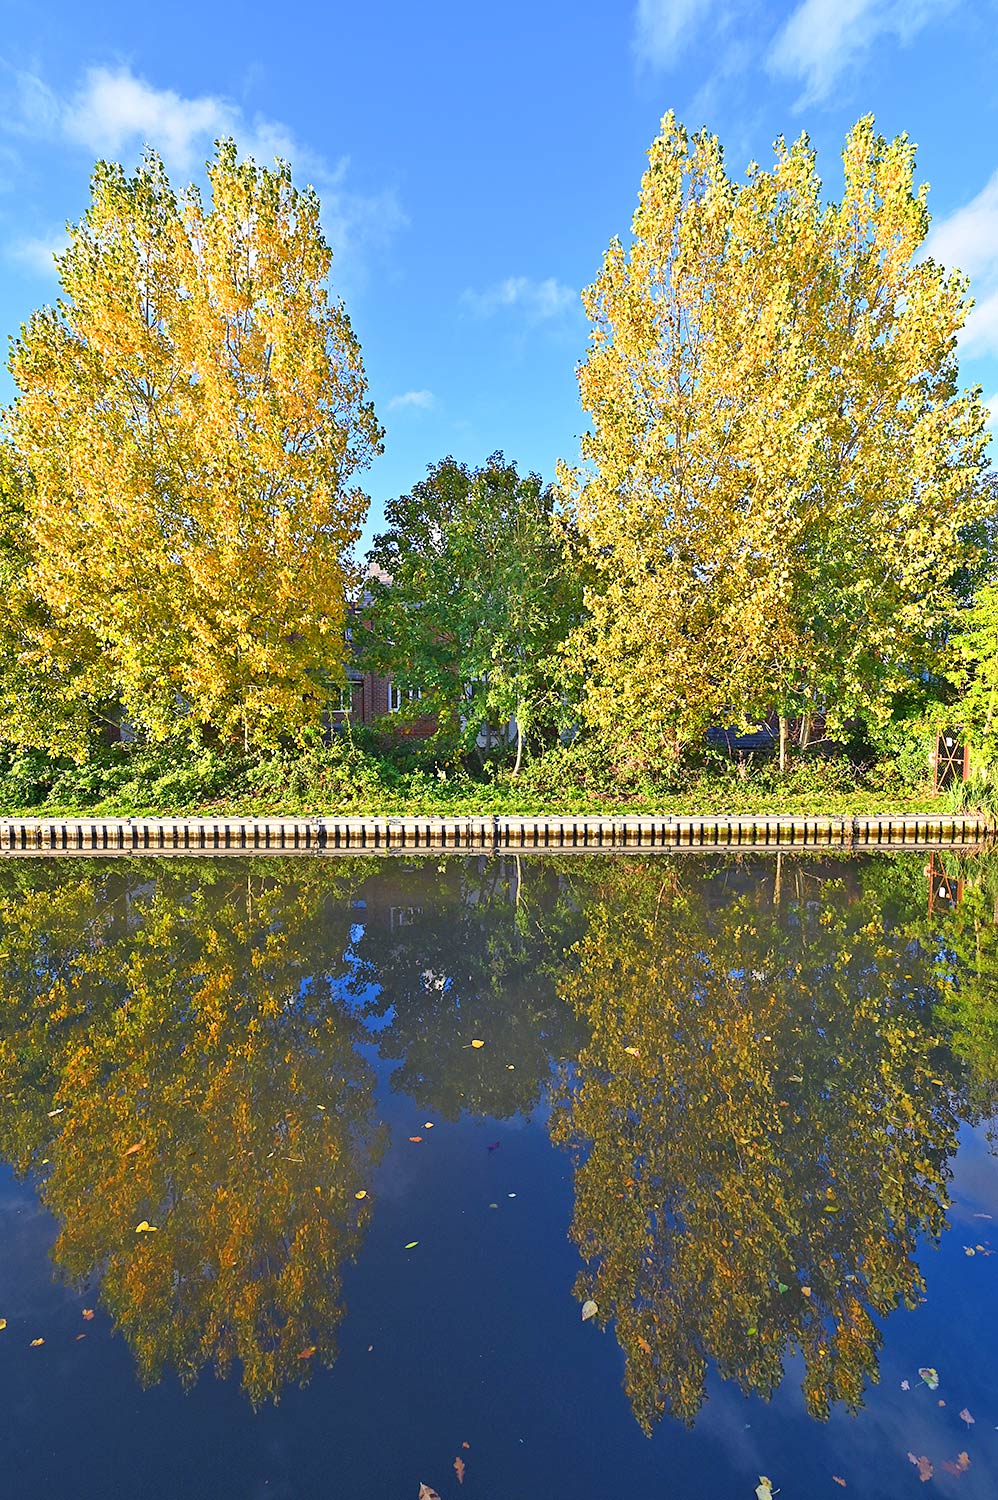 Picture of two trees in their autumns colours reflecting in the water of the canal